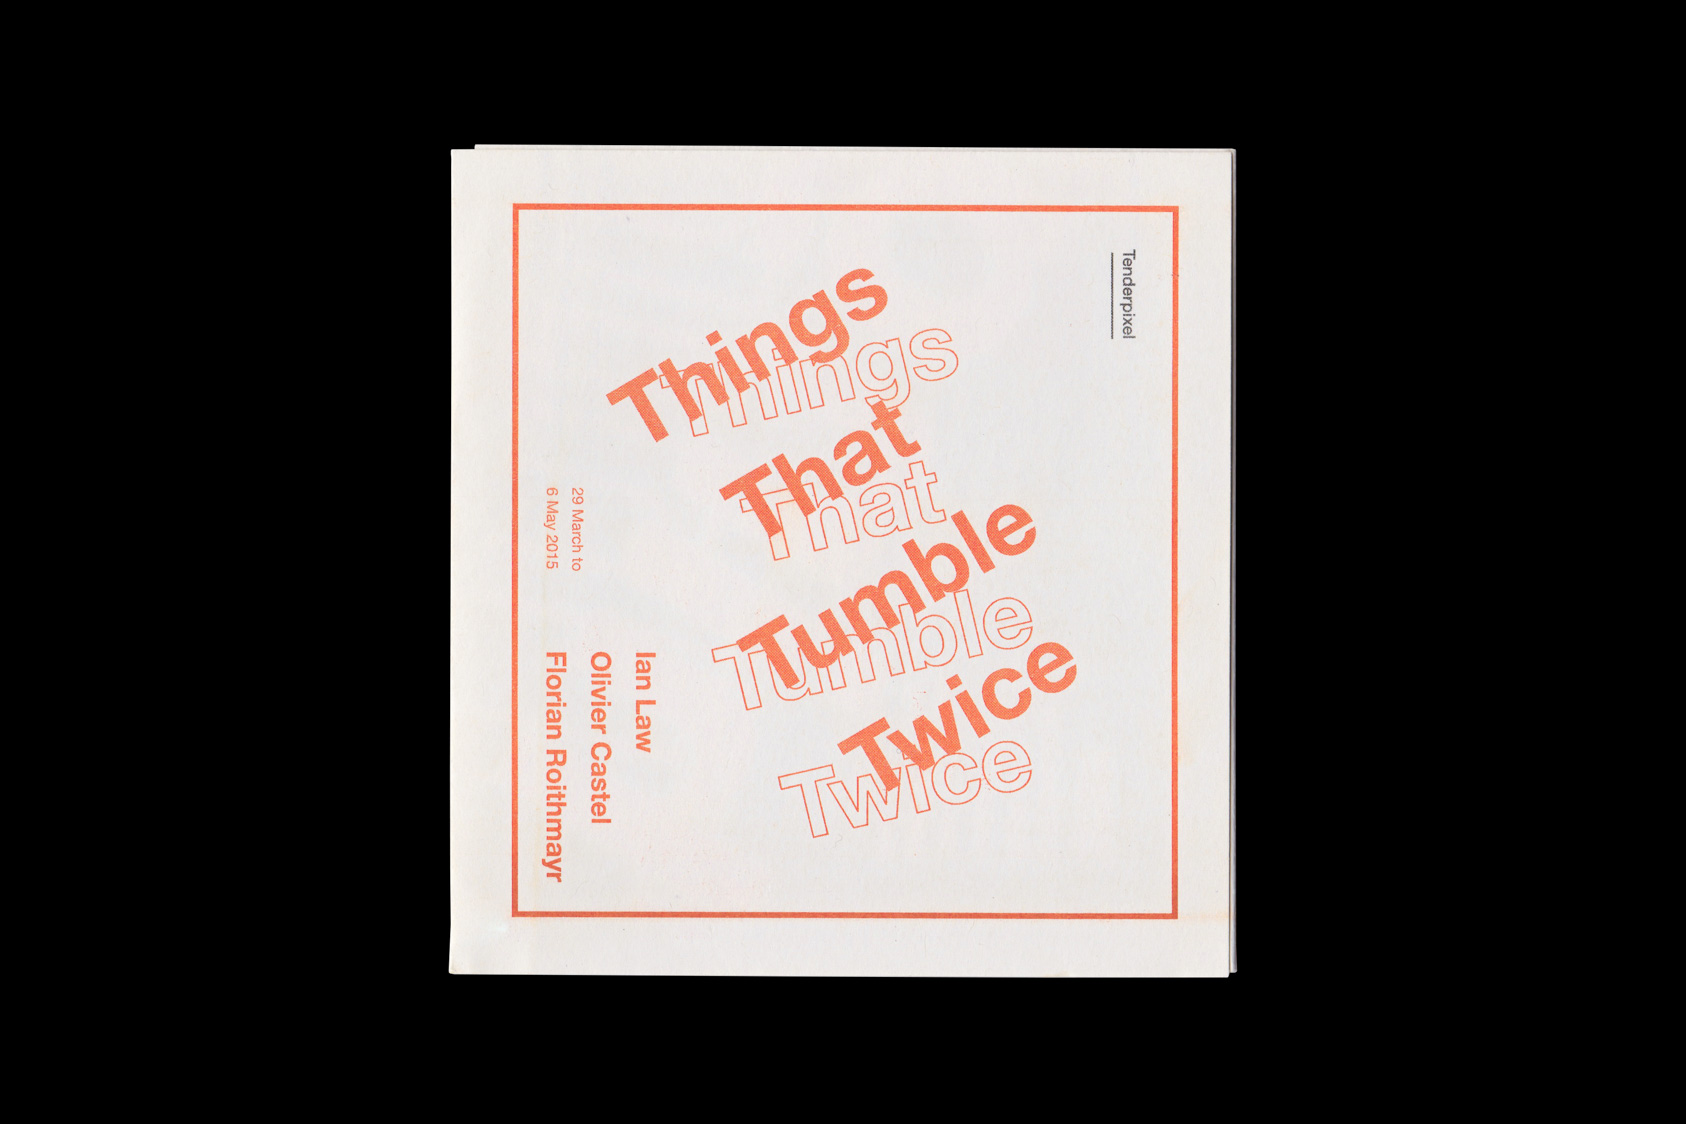 Things That Tumble Twice, by the agency for emerging ideas